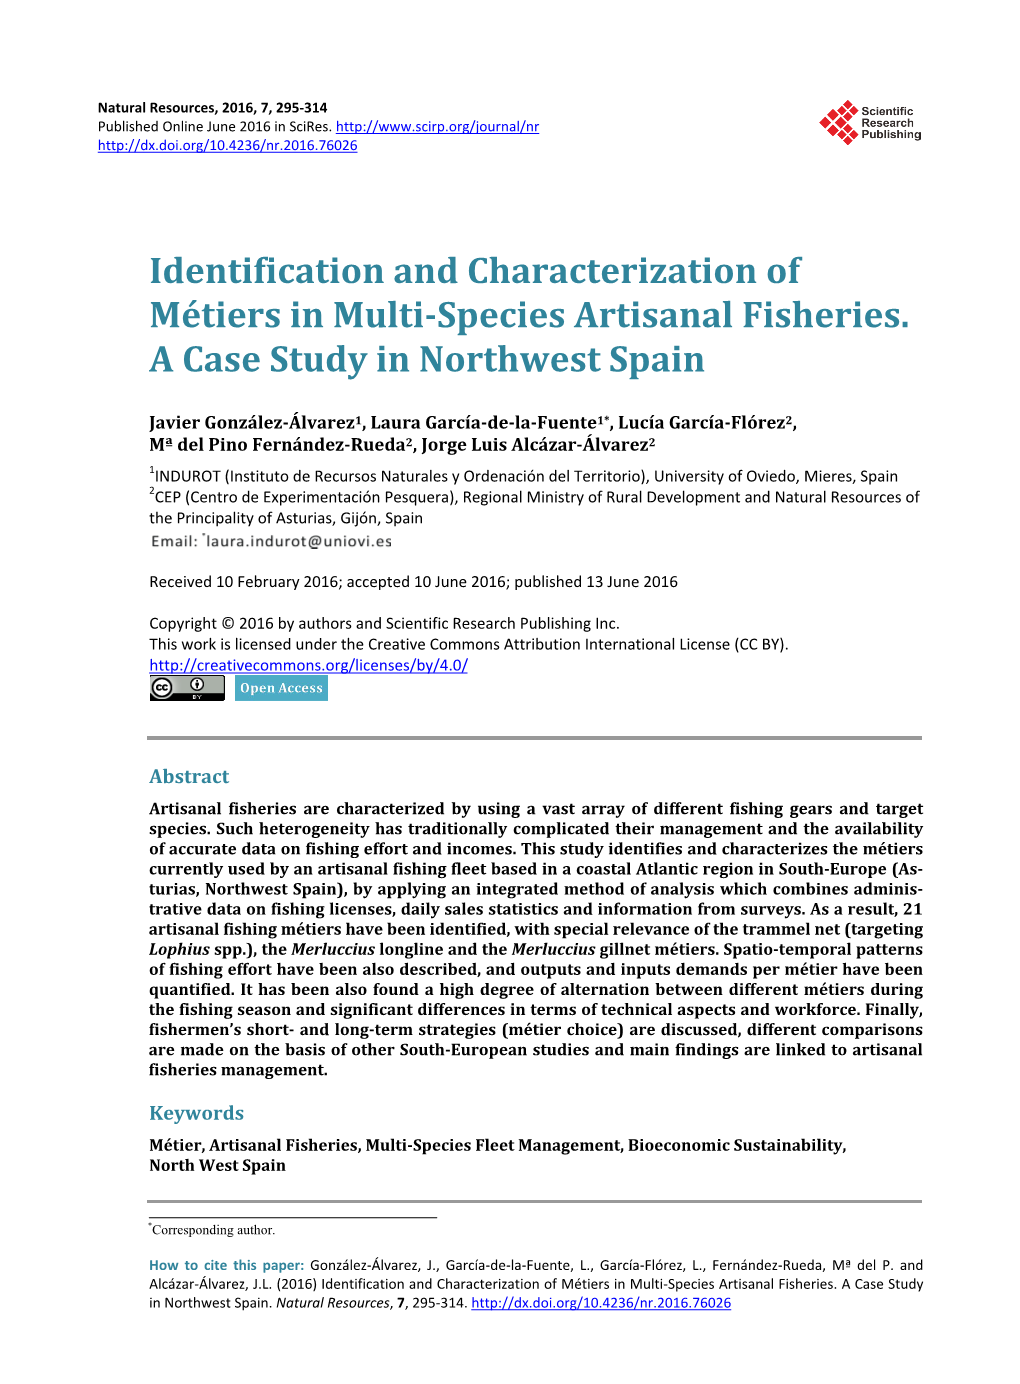 Identification and Characterization of Métiers in Multi-Species Artisanal Fisheries